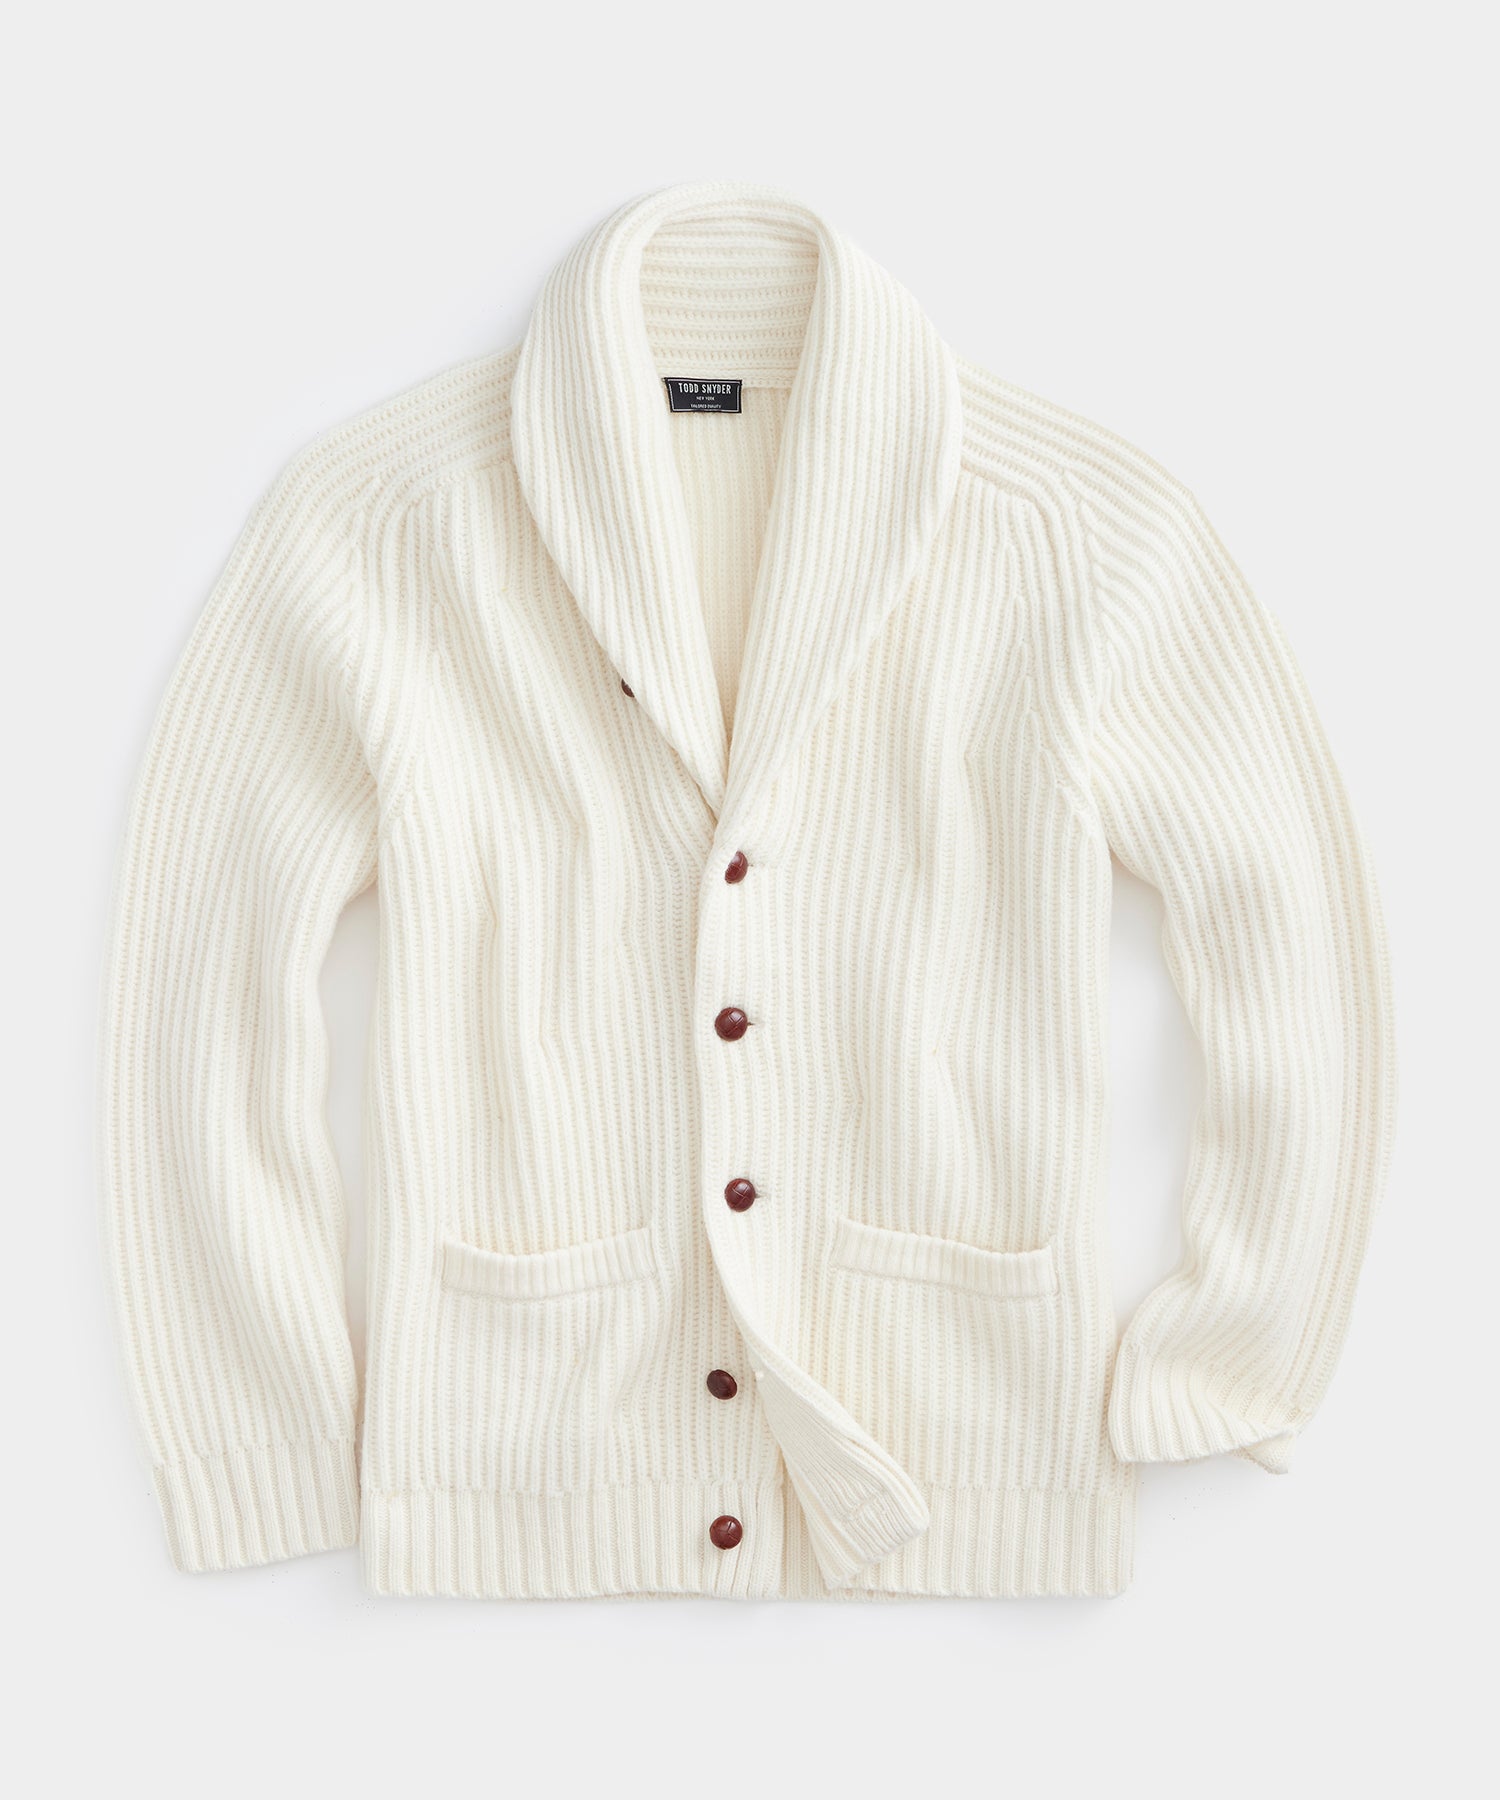 Todd Snyder Old Town Shawl Cardigan in Antique White